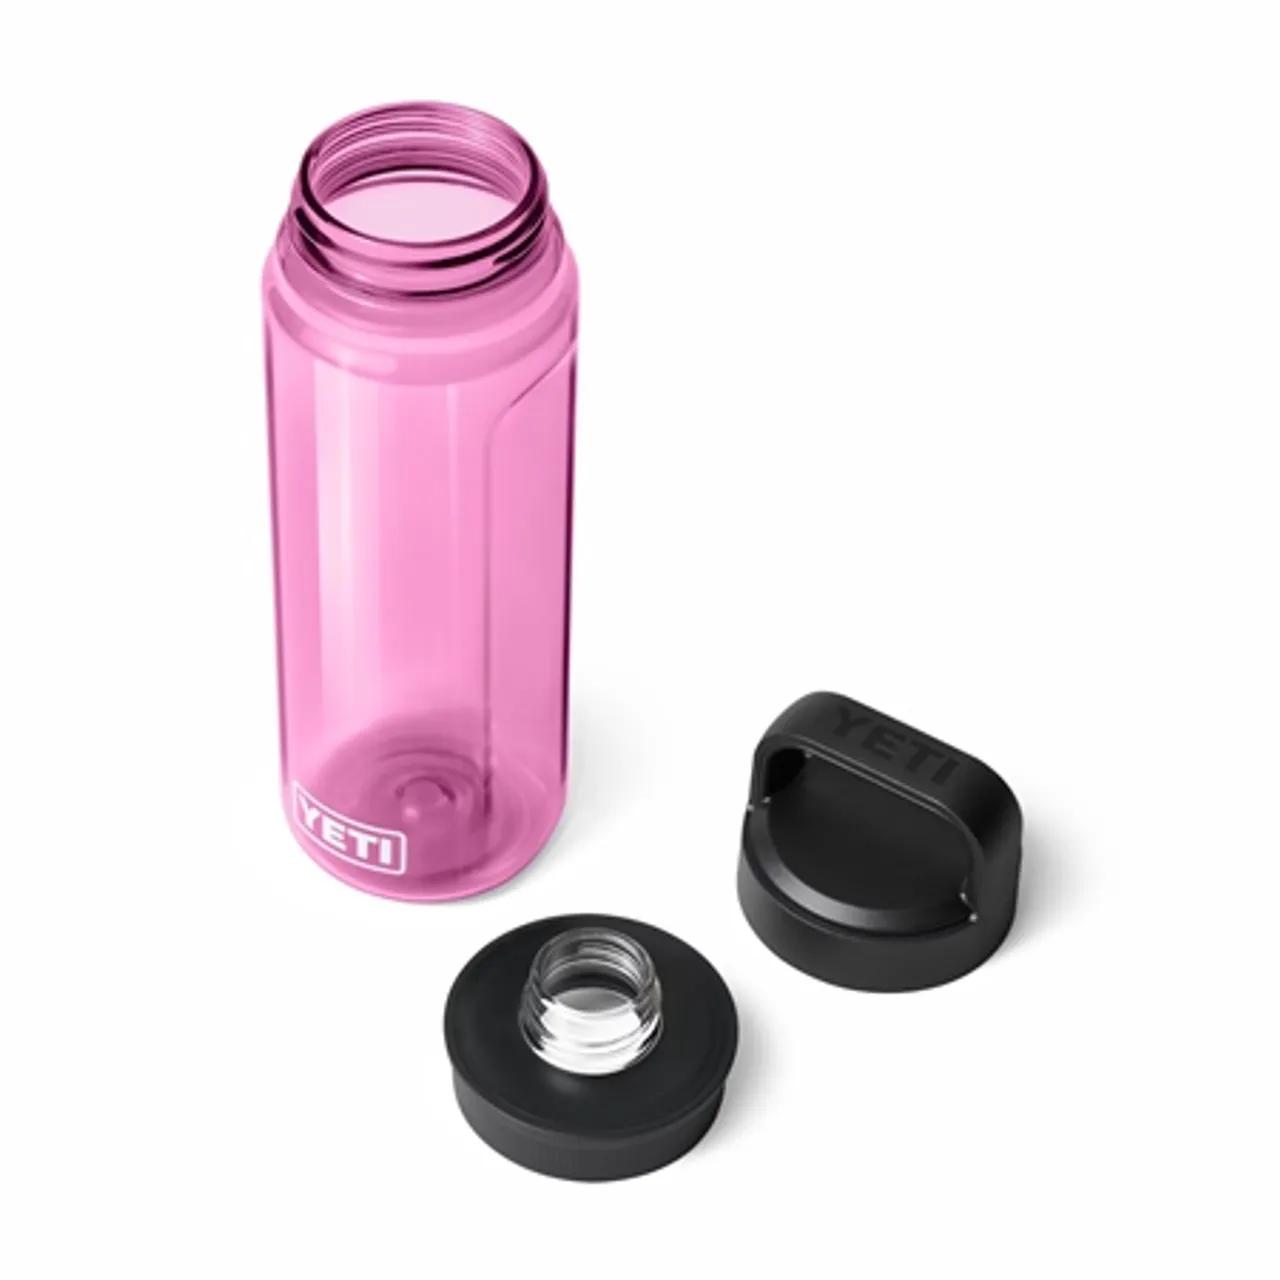 Yeti Yonder 750ml Water Bottle With Tether Cap - Power Pink - O/S